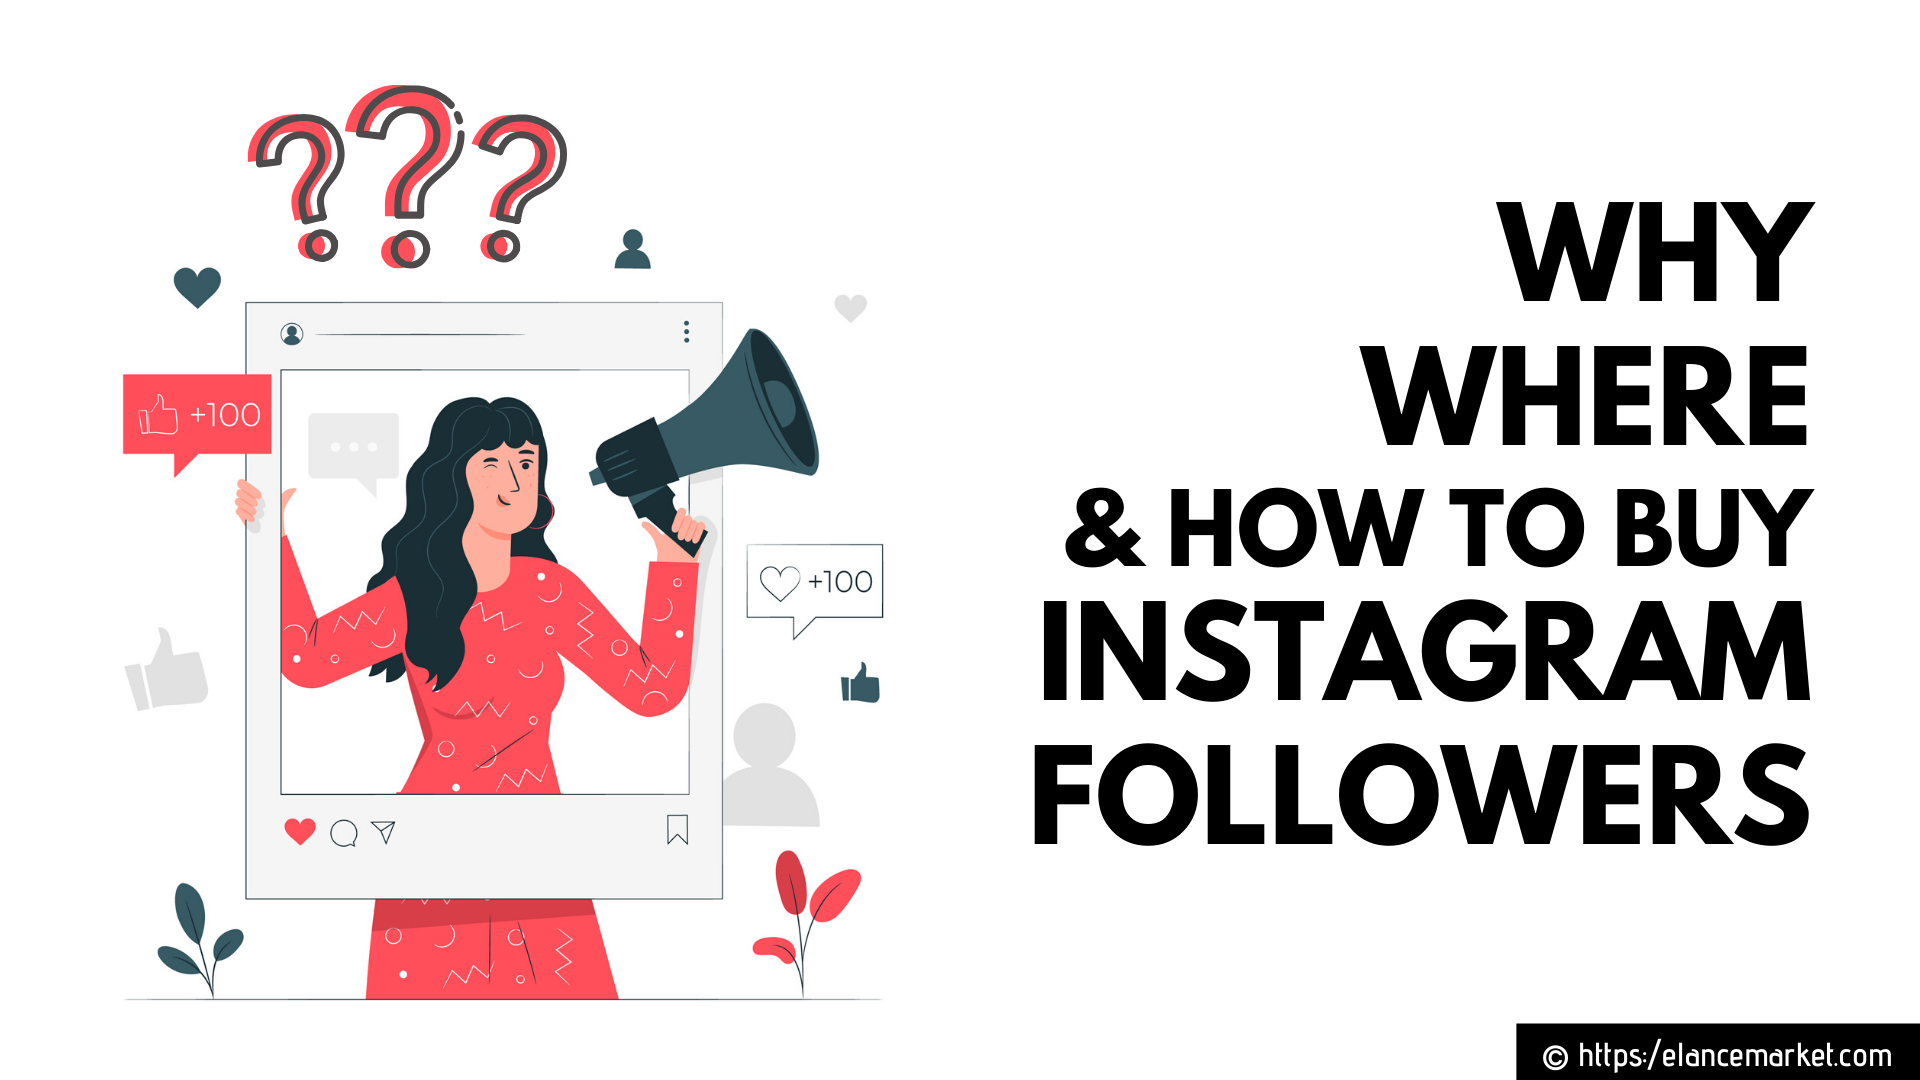 Why, Where & How to Buy Instagram Followers?